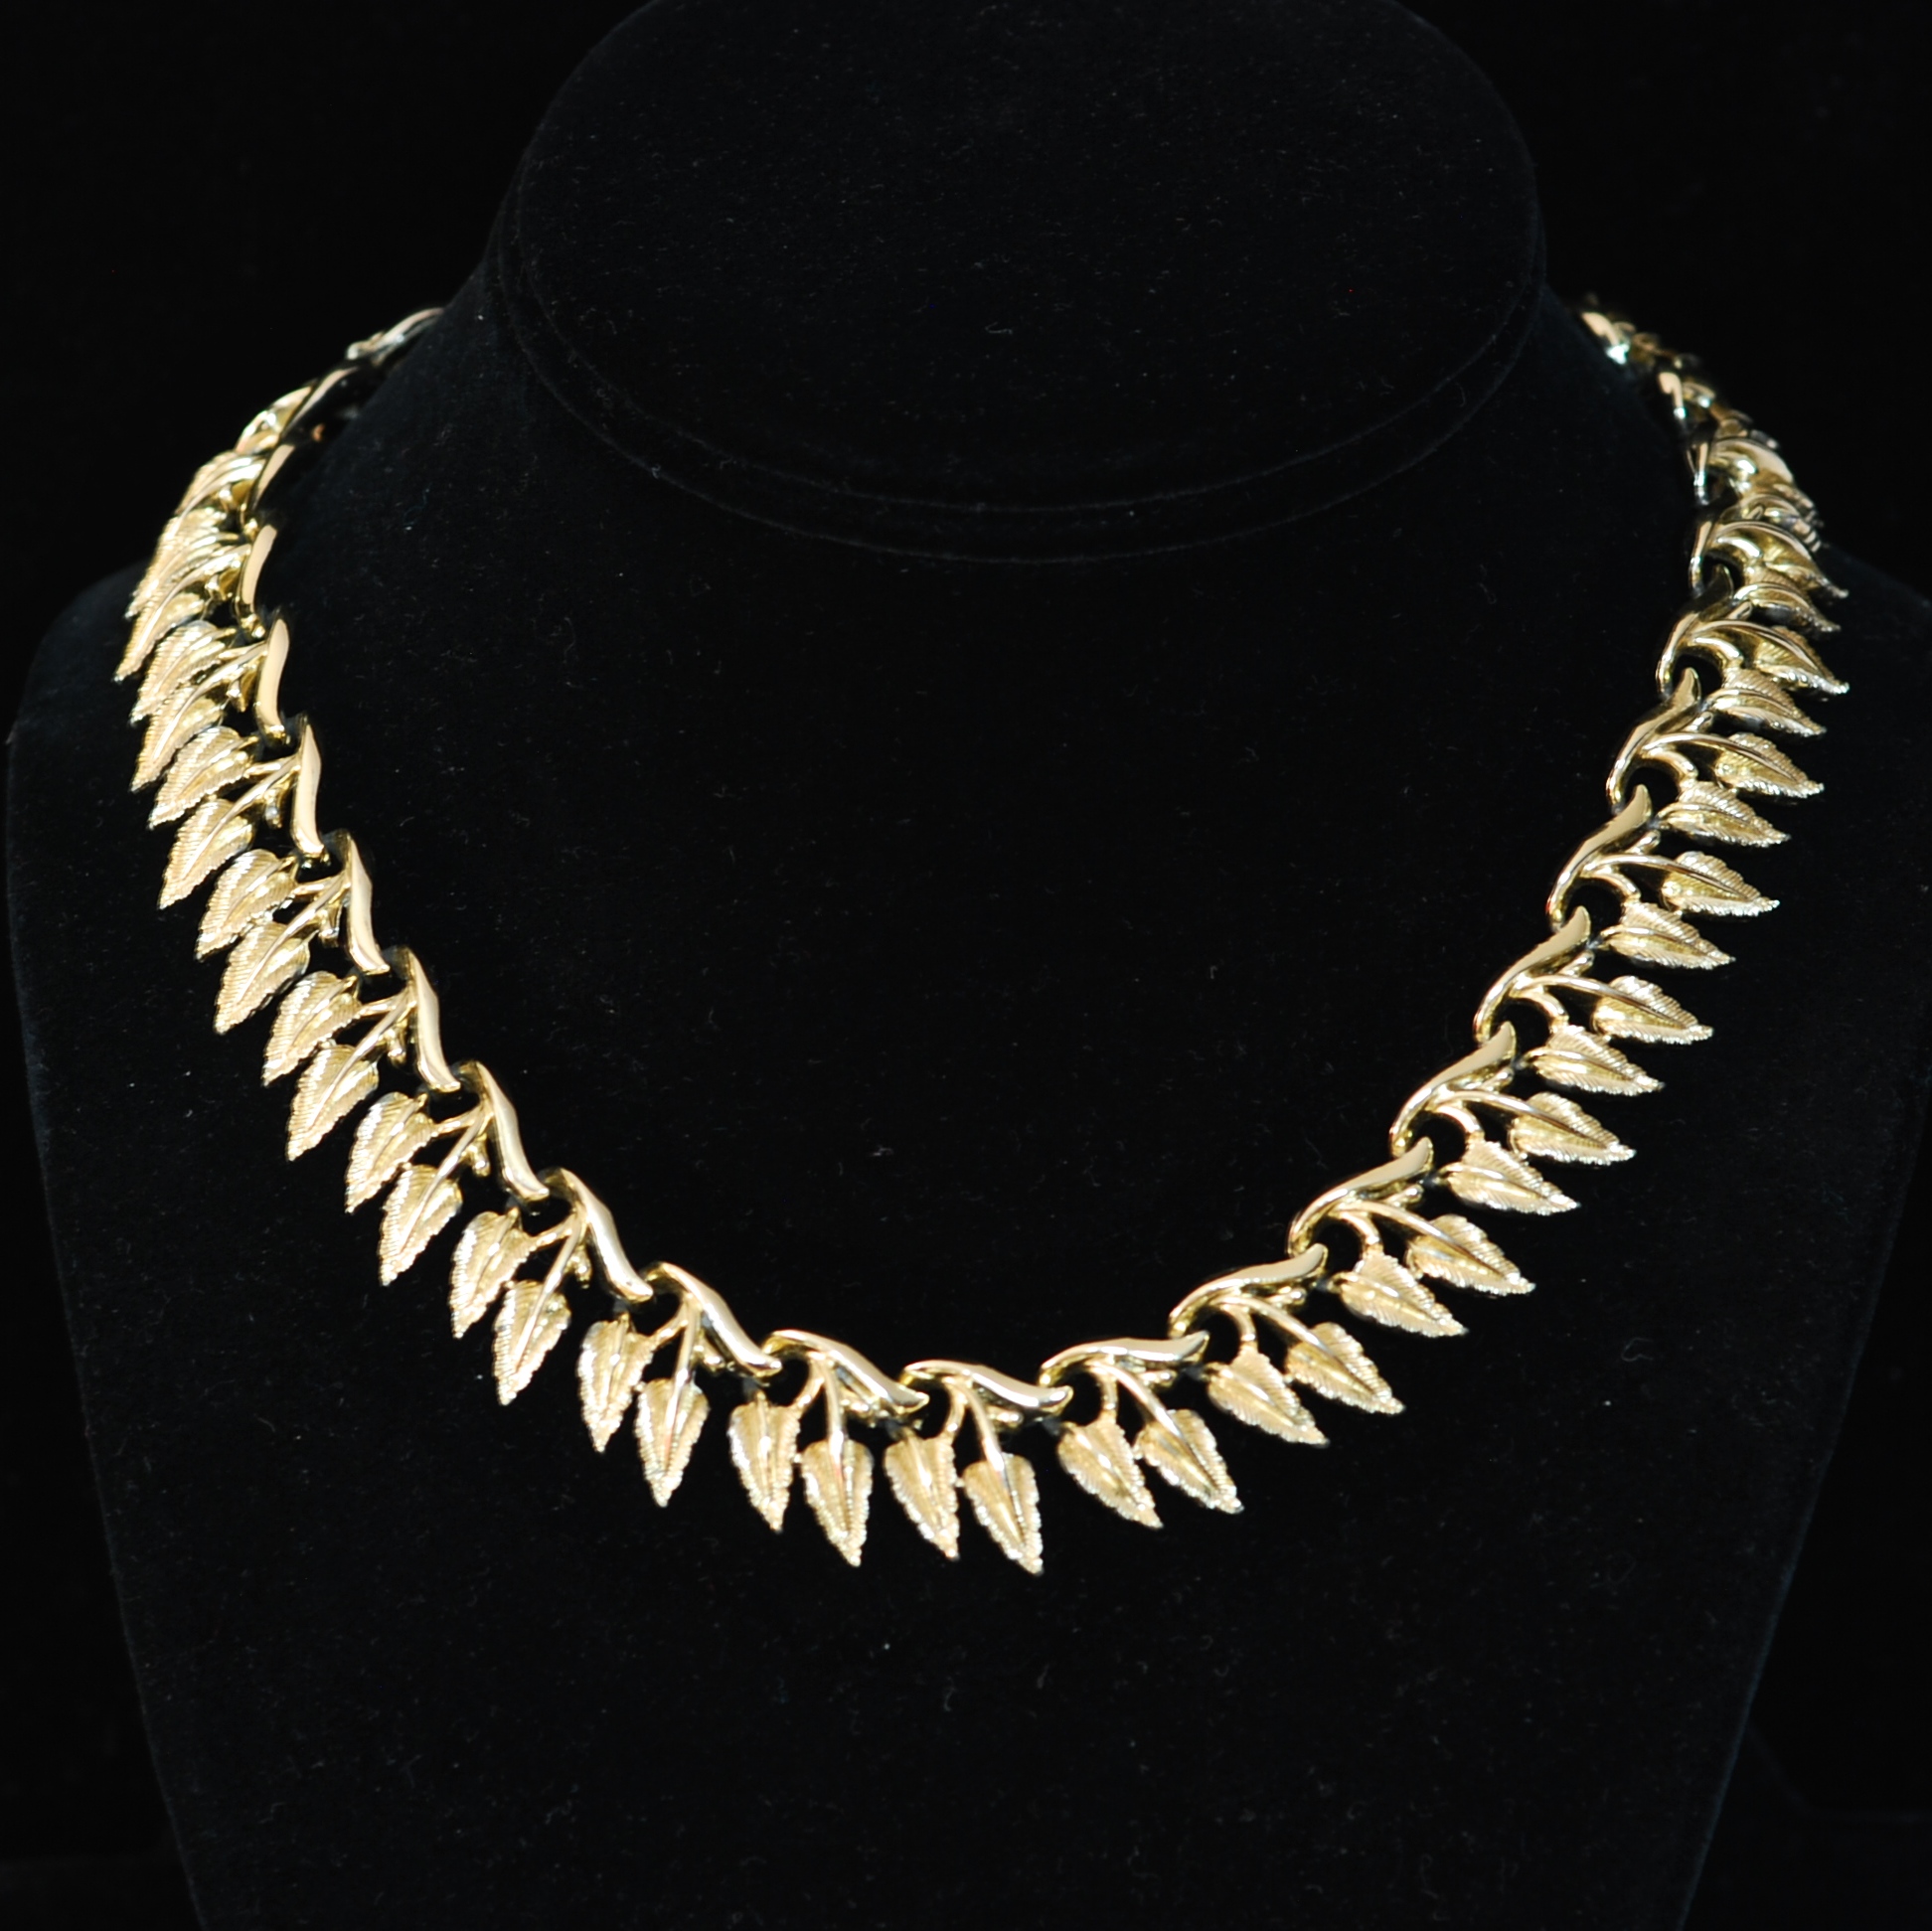 Coro Gold Tone 1950’s Necklace Featuring A Row Of Leaves & Stems ...